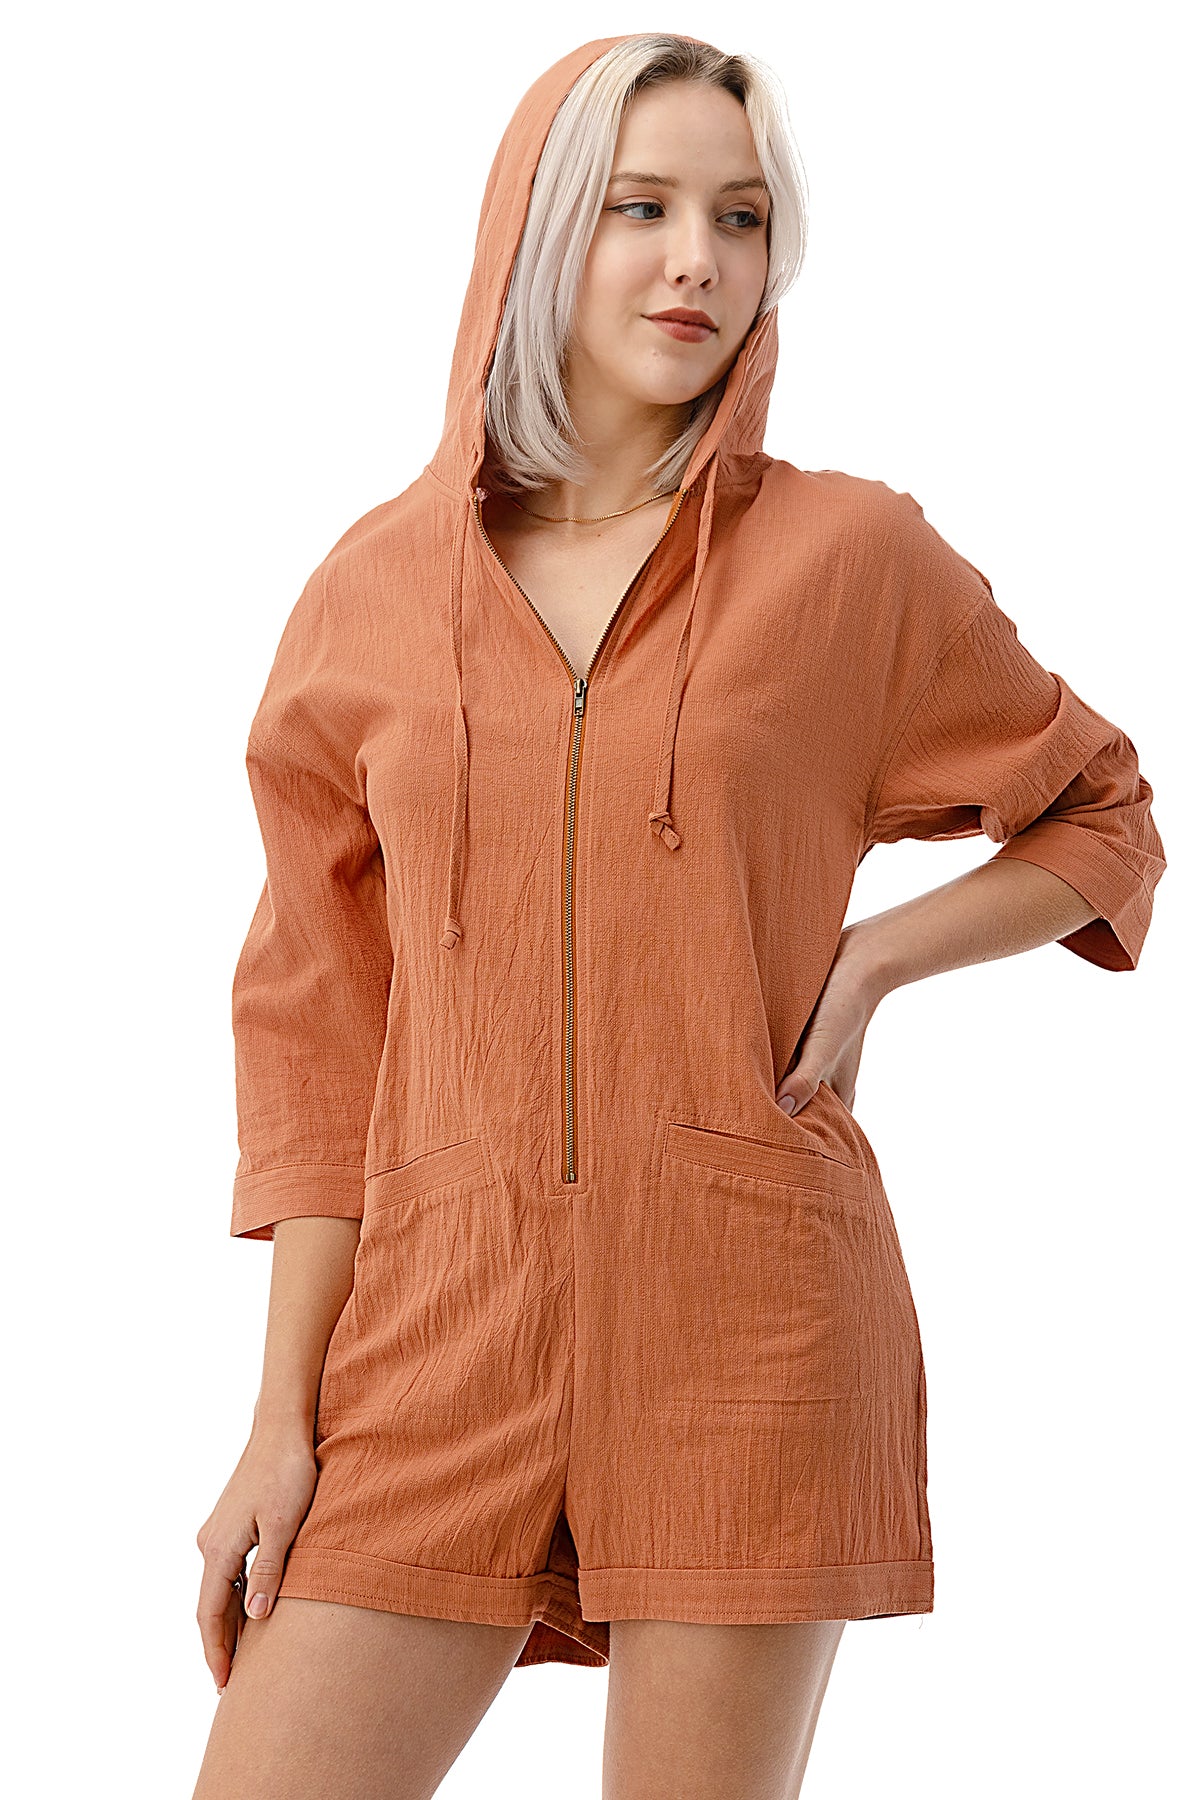 EDGY Land Girl's and Women's Casual 3/4 Sleeve ZiPPEr Up Welt Pockets Hooded Romper